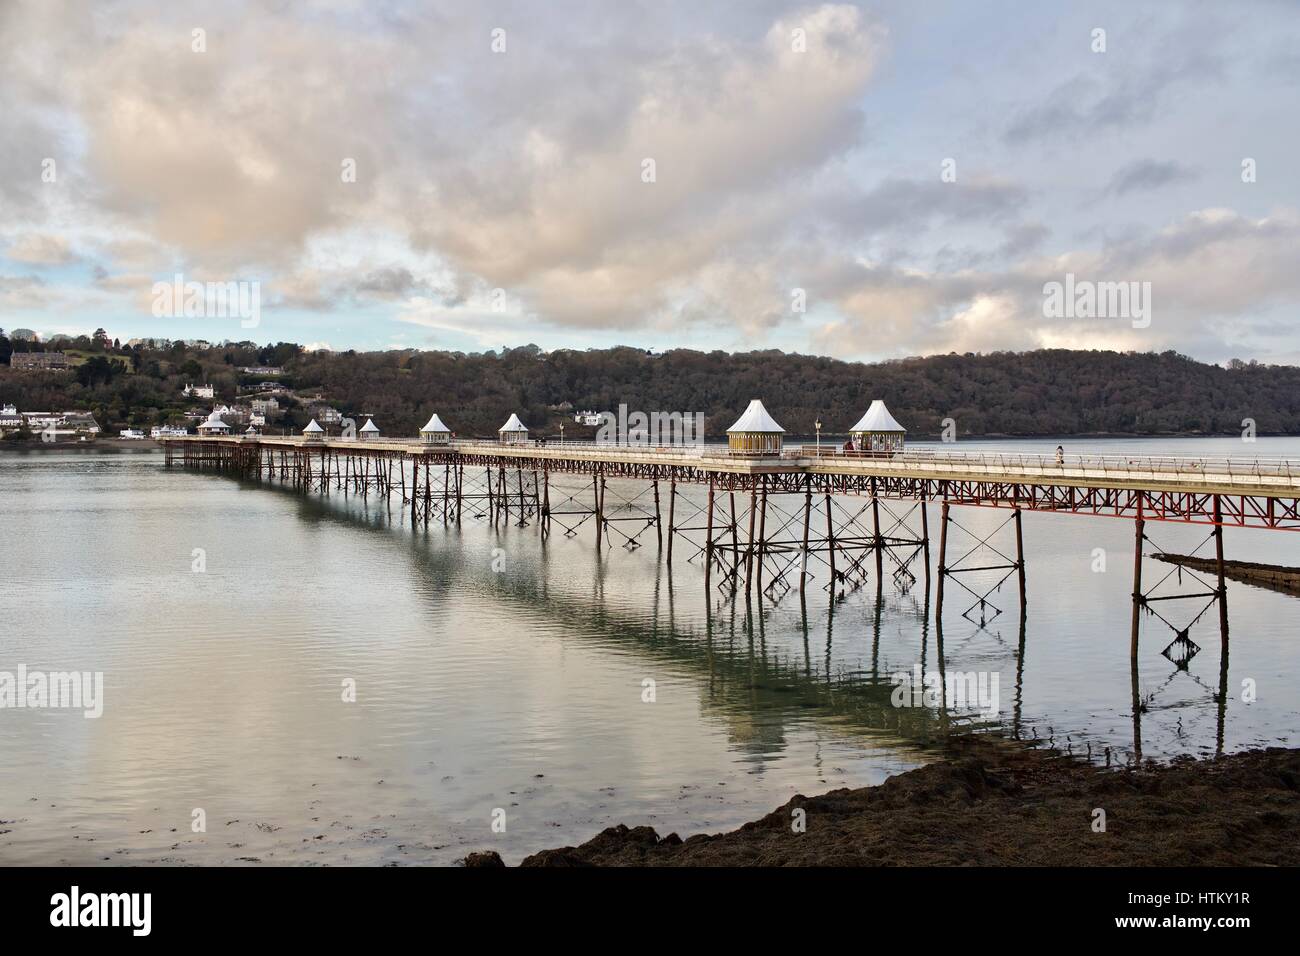 Garth Pier at Bangor with reflections in the water and Anglesey beyond on the other side of the Menai Strait Stock Photo